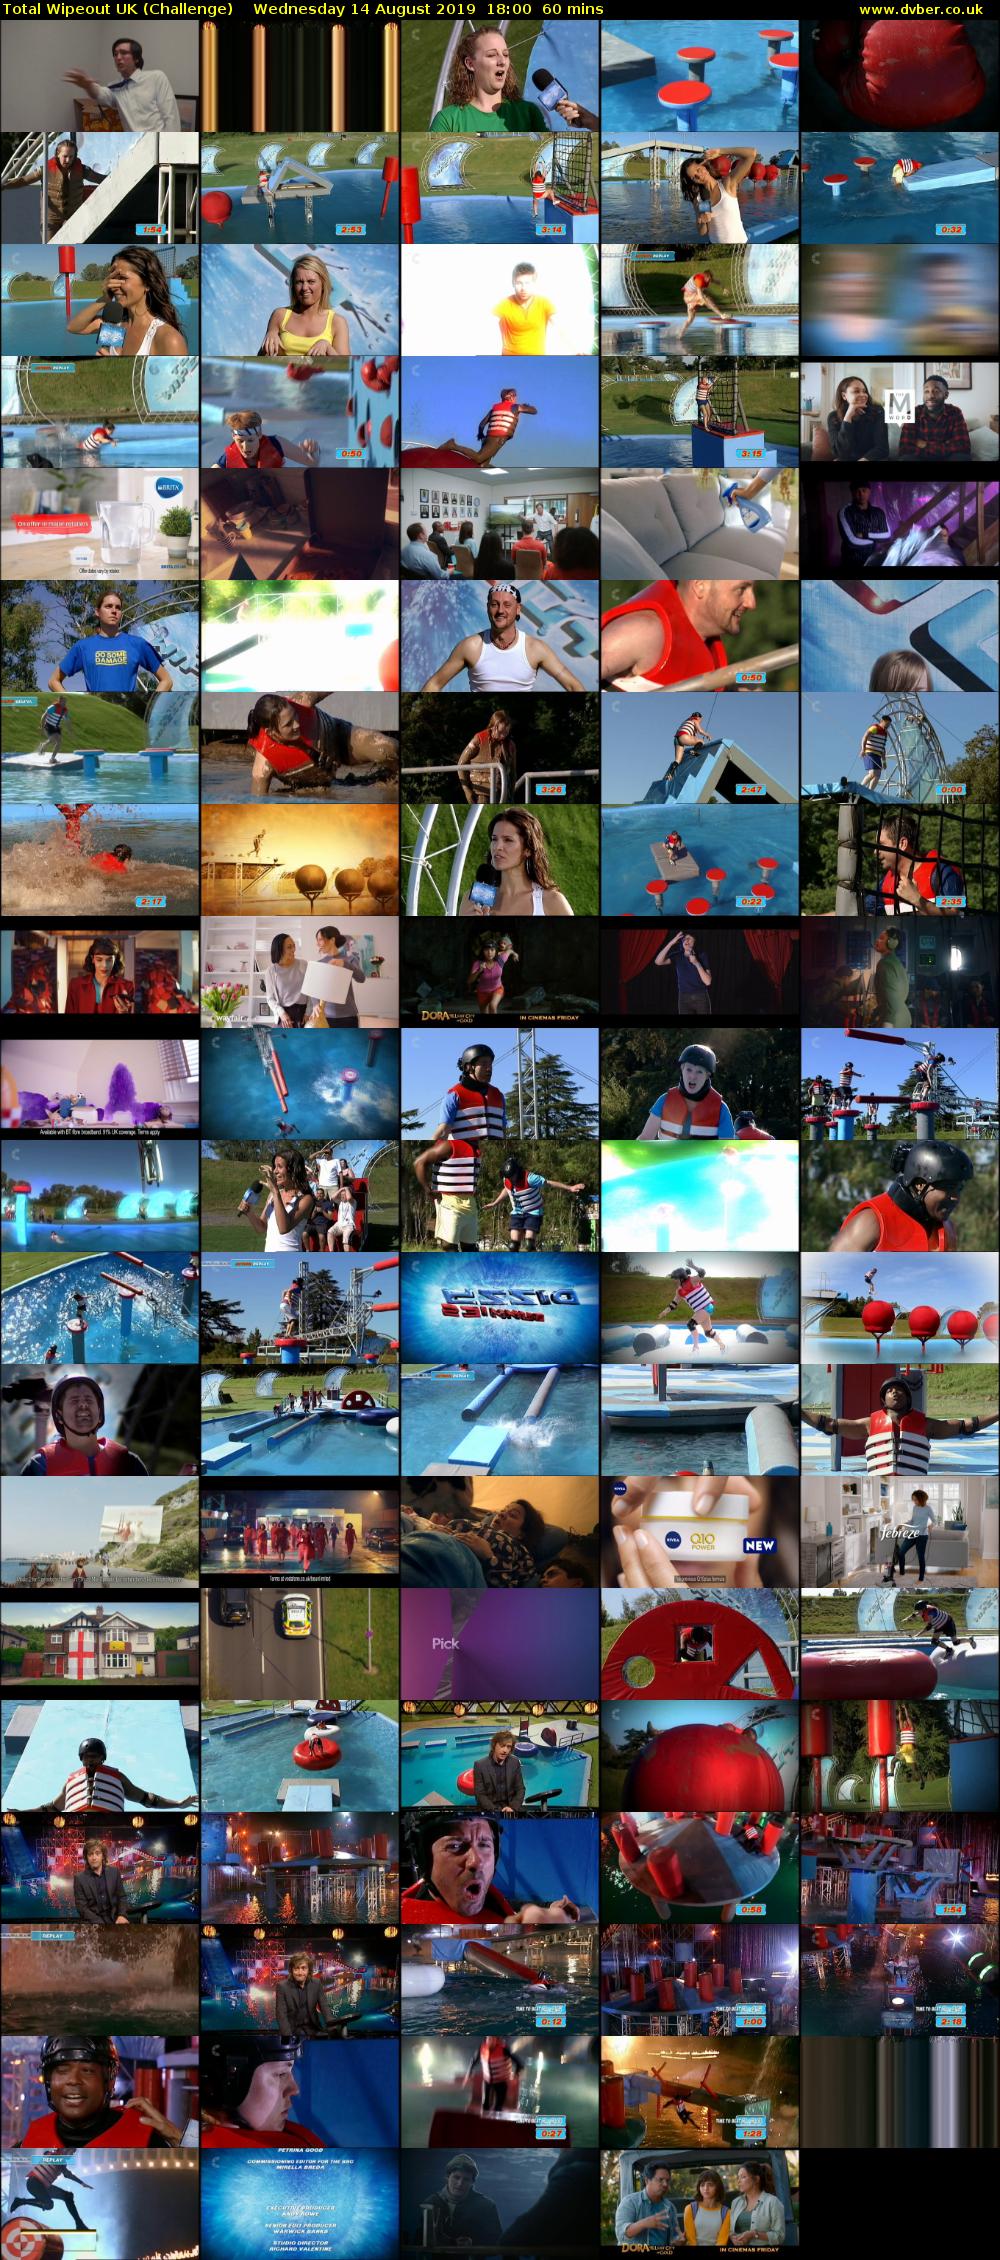 Total Wipeout UK (Challenge) Wednesday 14 August 2019 18:00 - 19:00